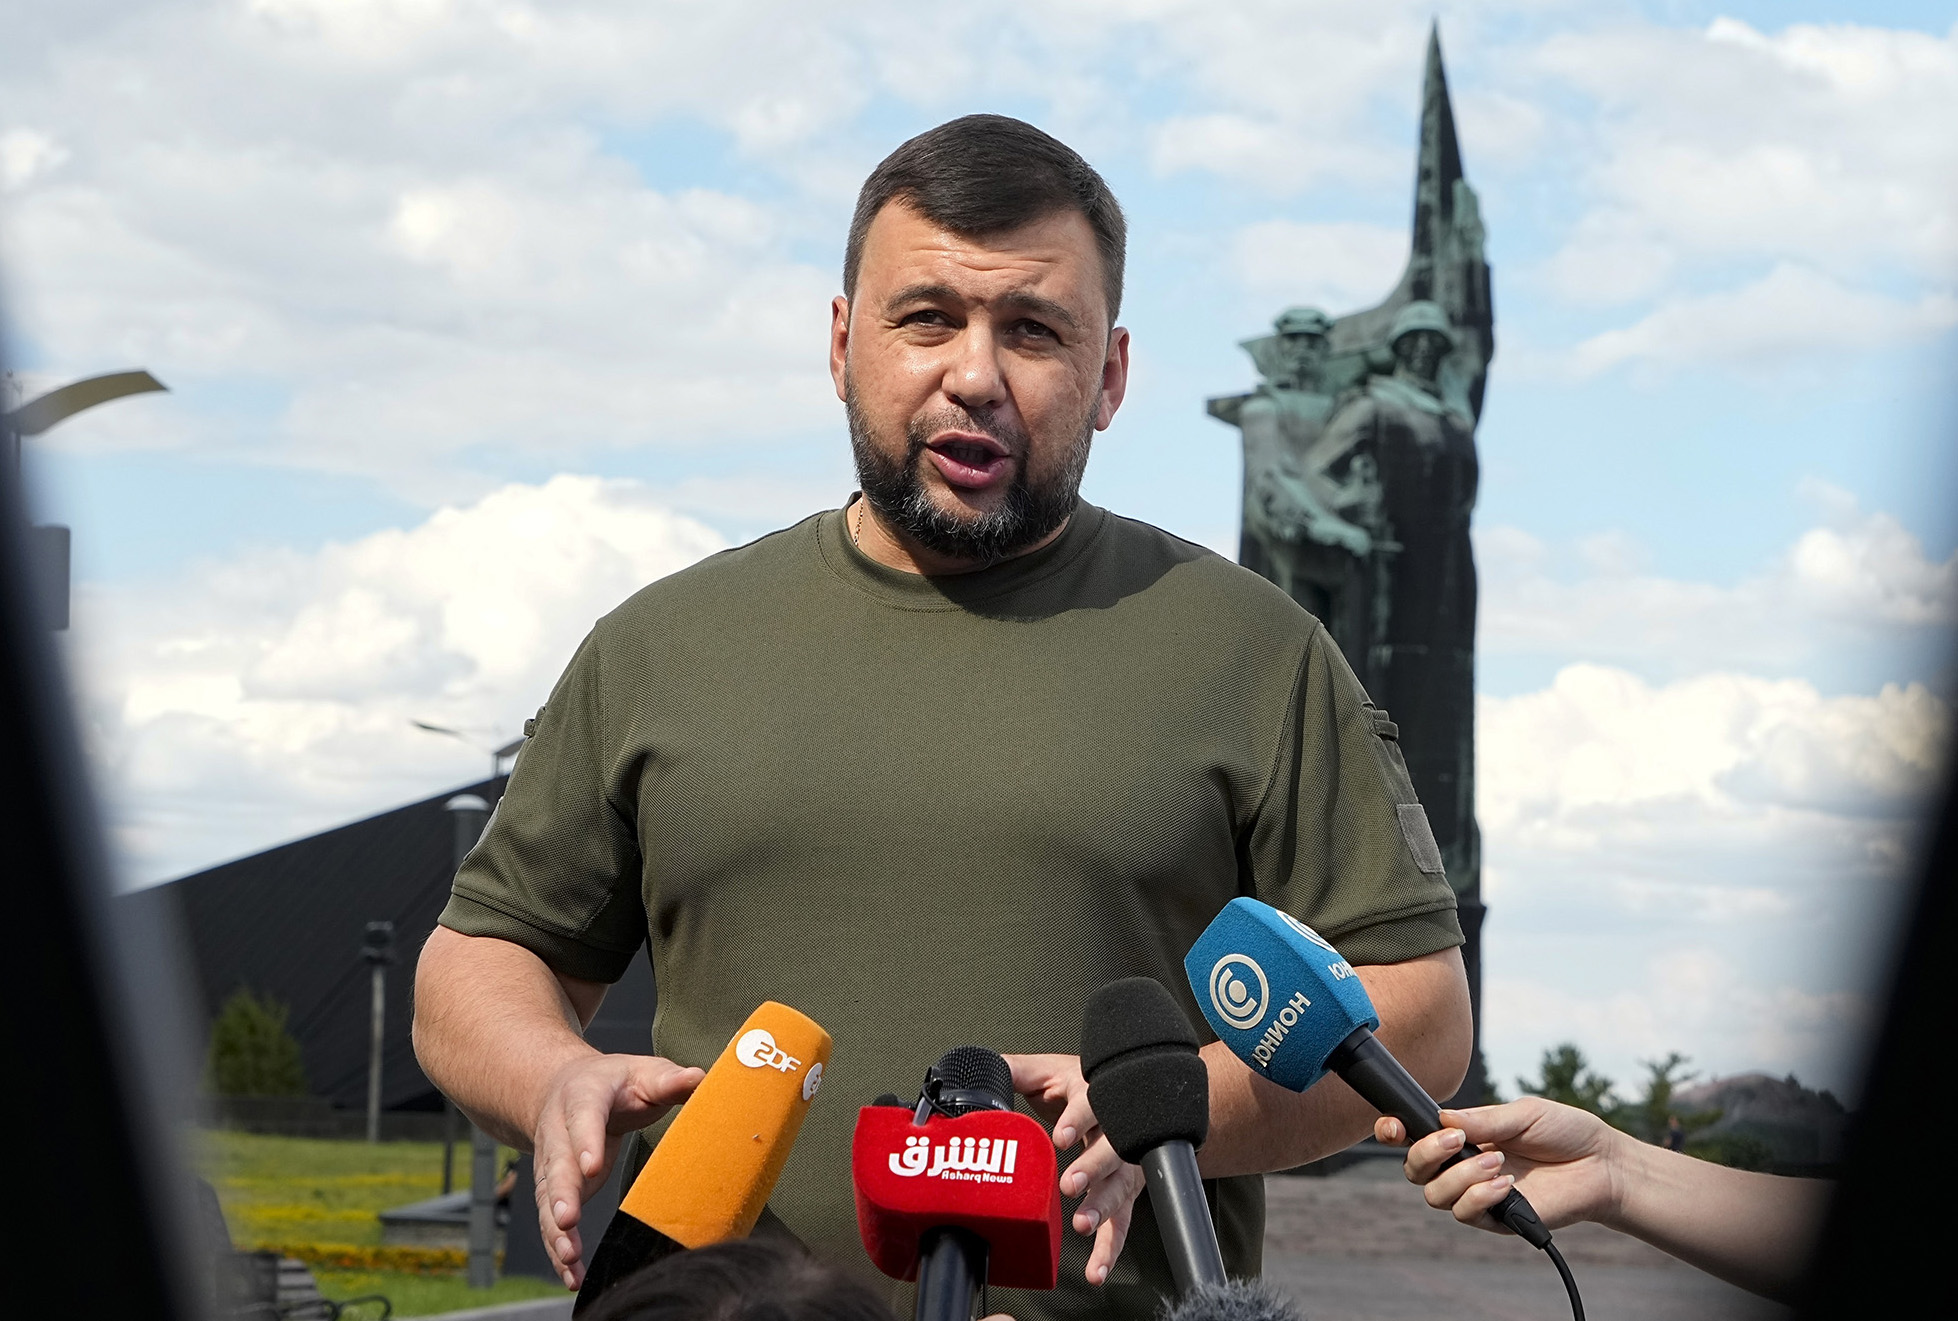 Denis Pushilin, the leader of the Donetsk People's Republic, speaks to journalists in Donetsk, eastern Ukraine, on July 13.